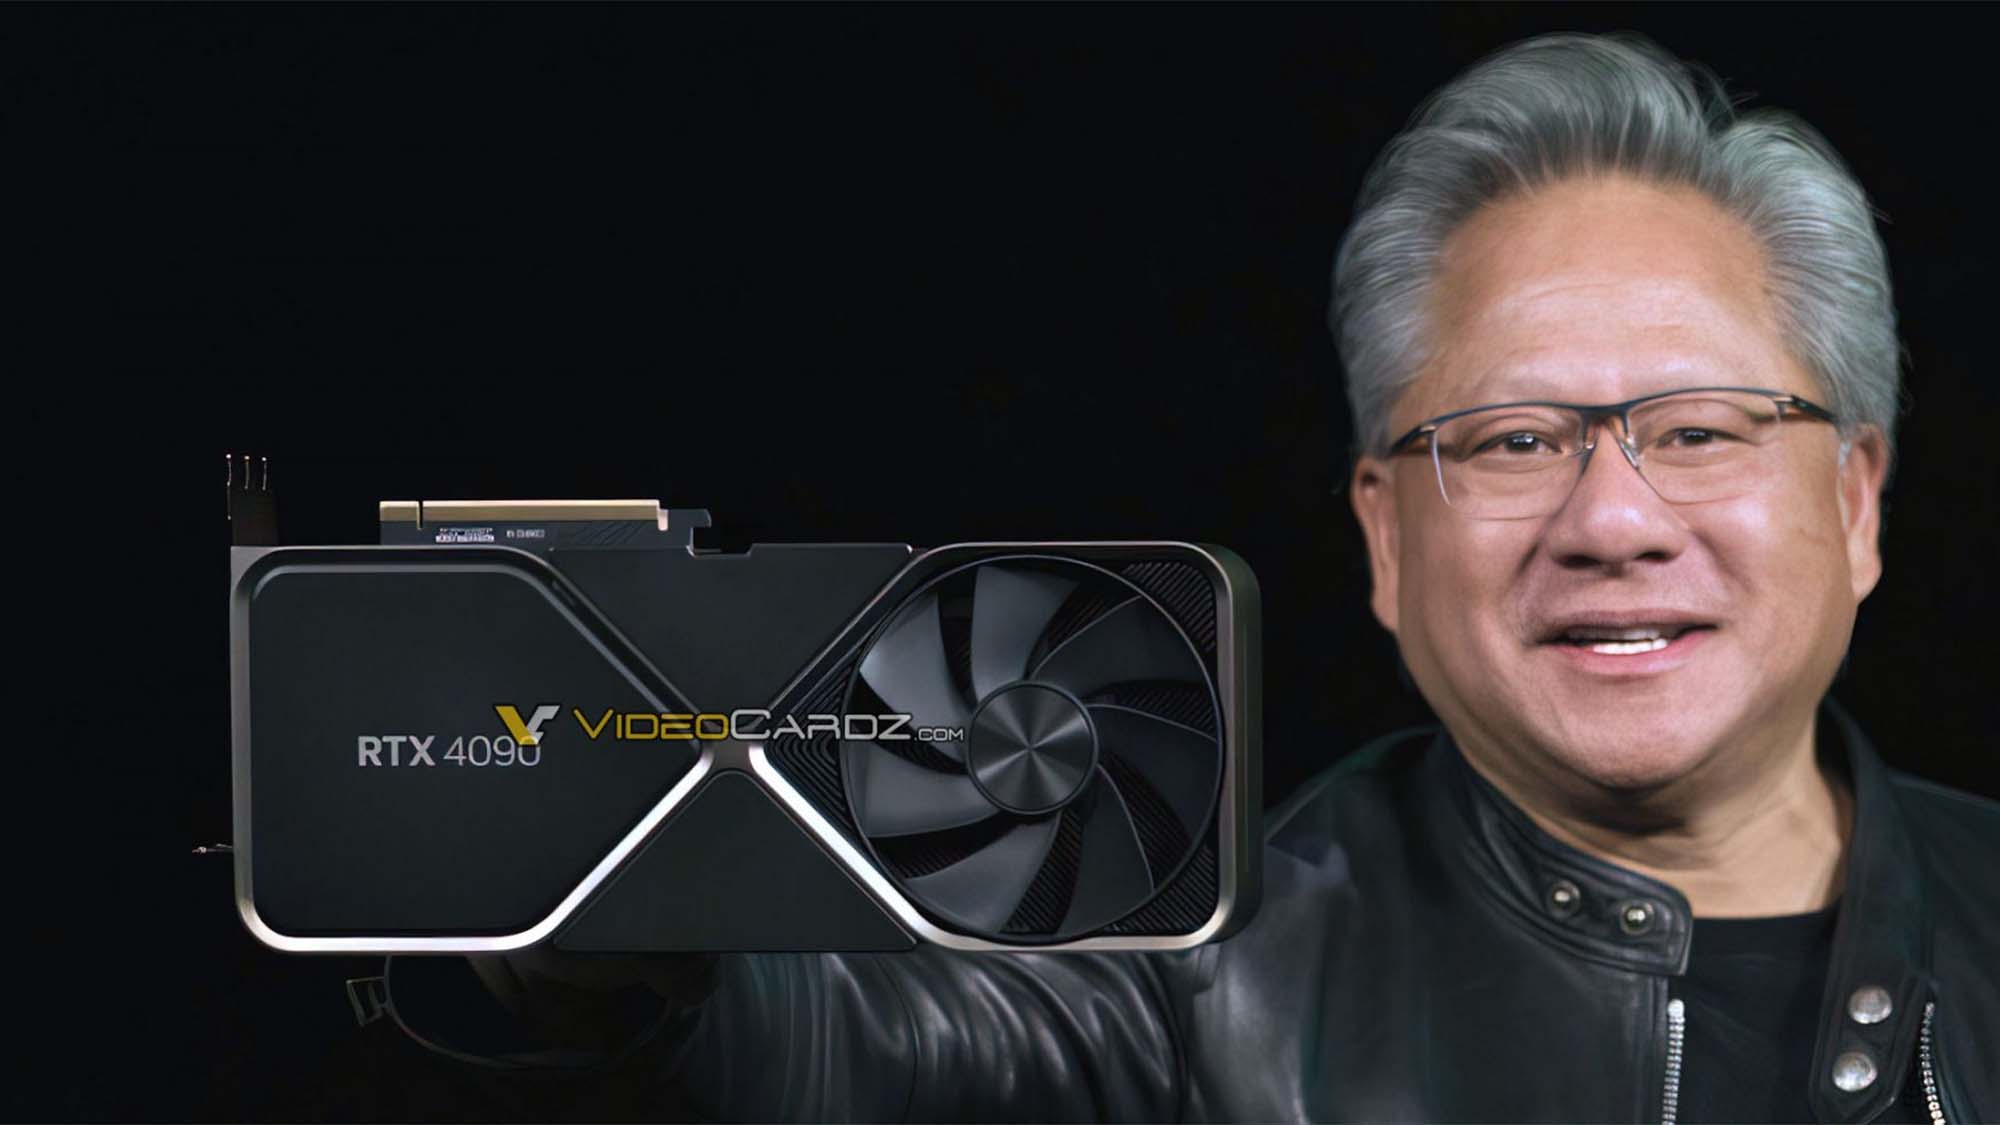 Jensen Huang purportedly holding the RTX 4090 against a black backdrop